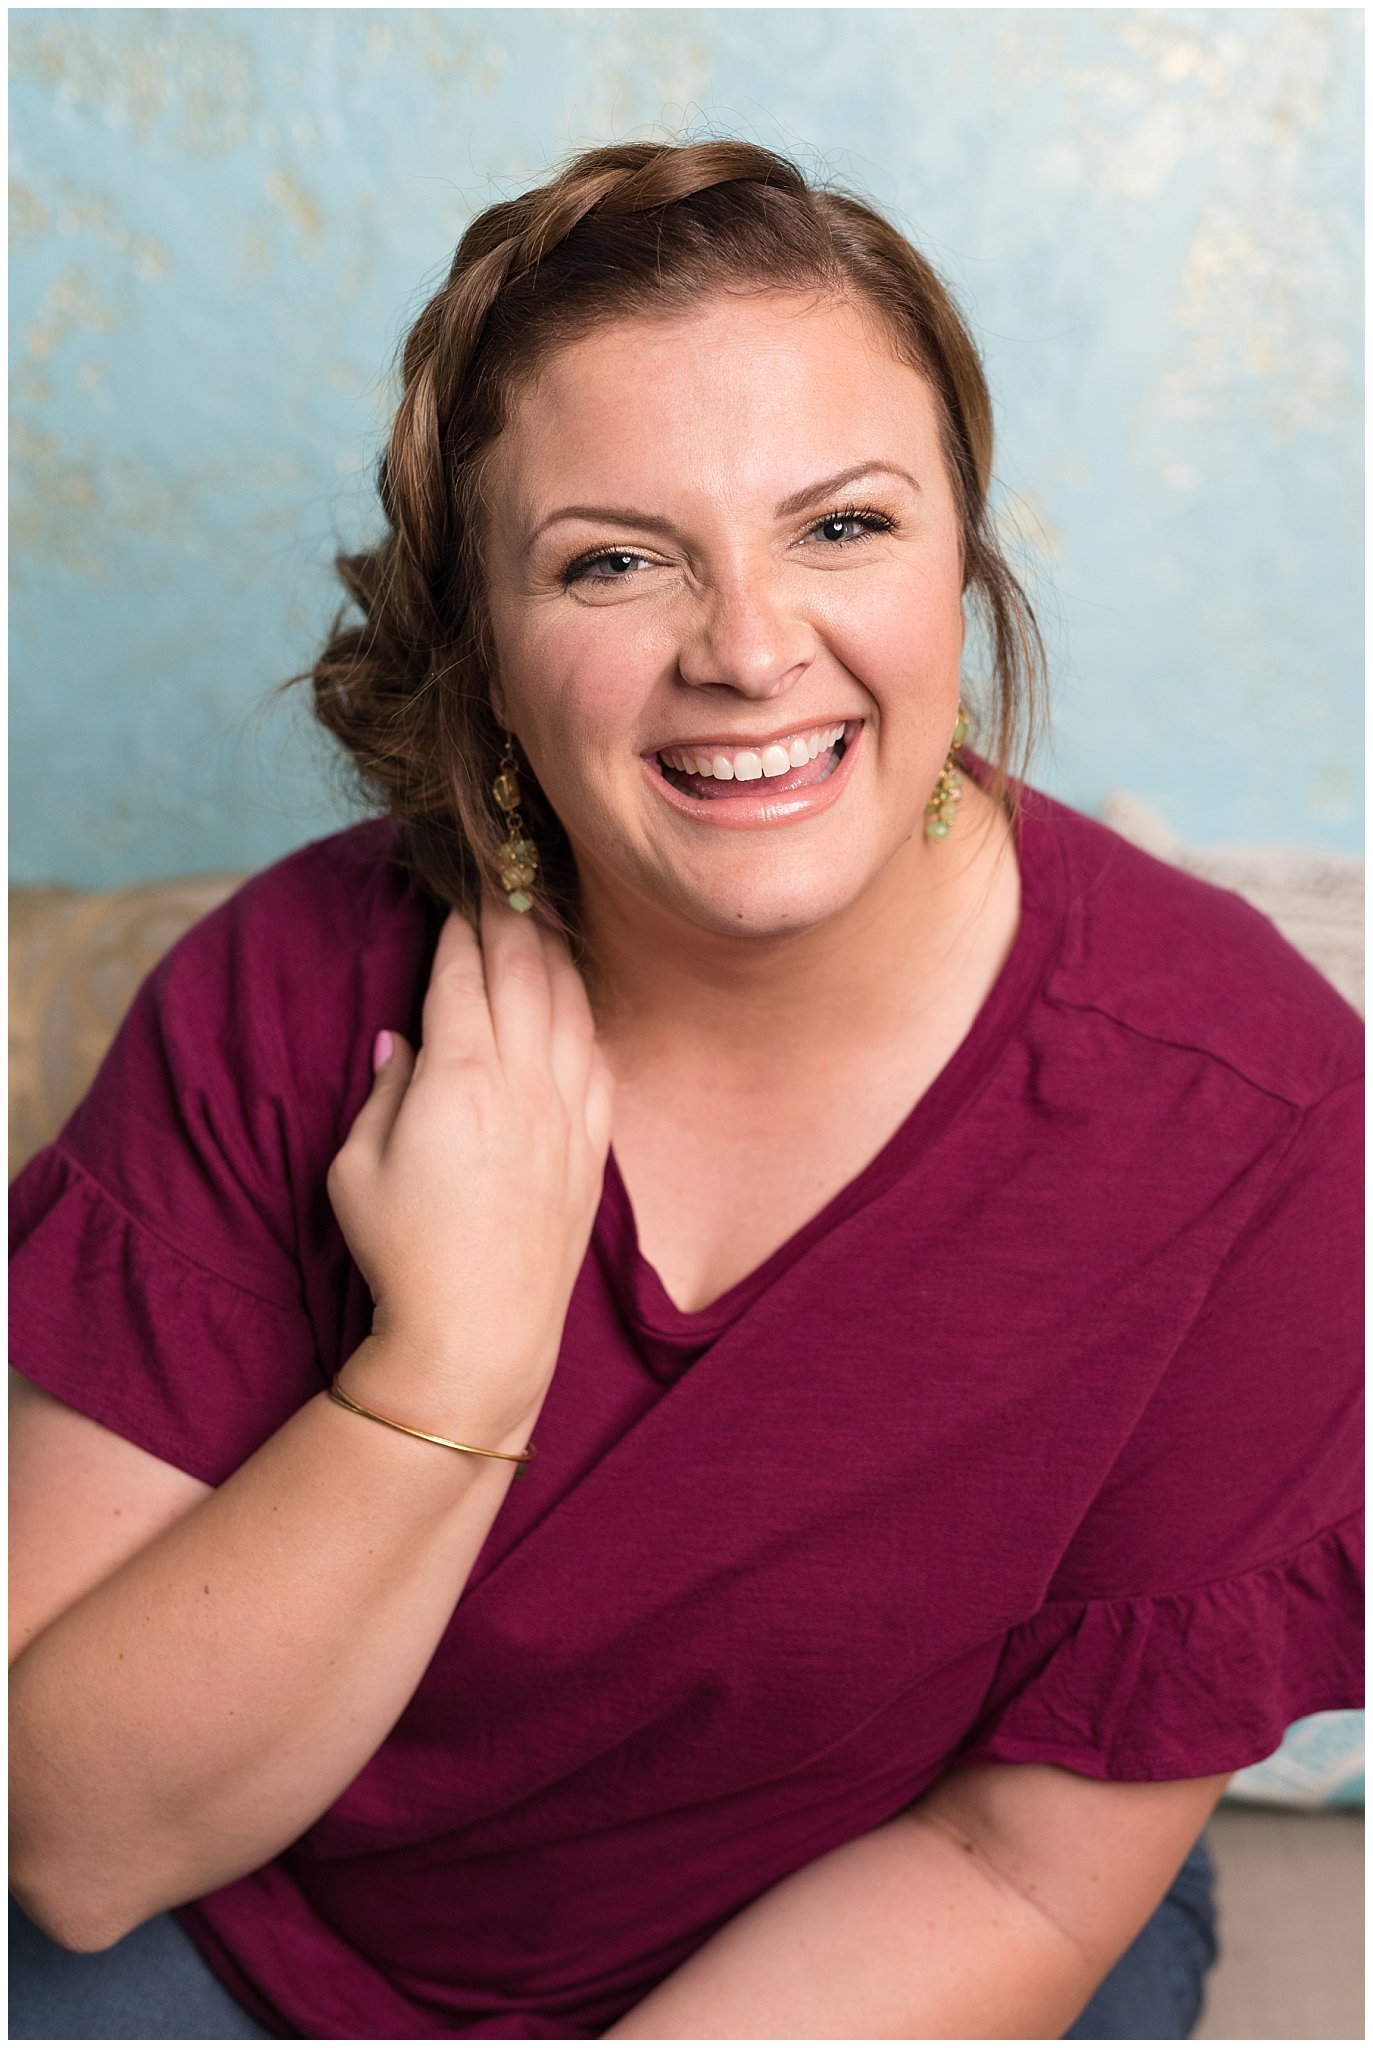 Hailey Gomez laughing during headshot | Why Hire a professional hair and makeup artist | Jessie and Dallin Photography